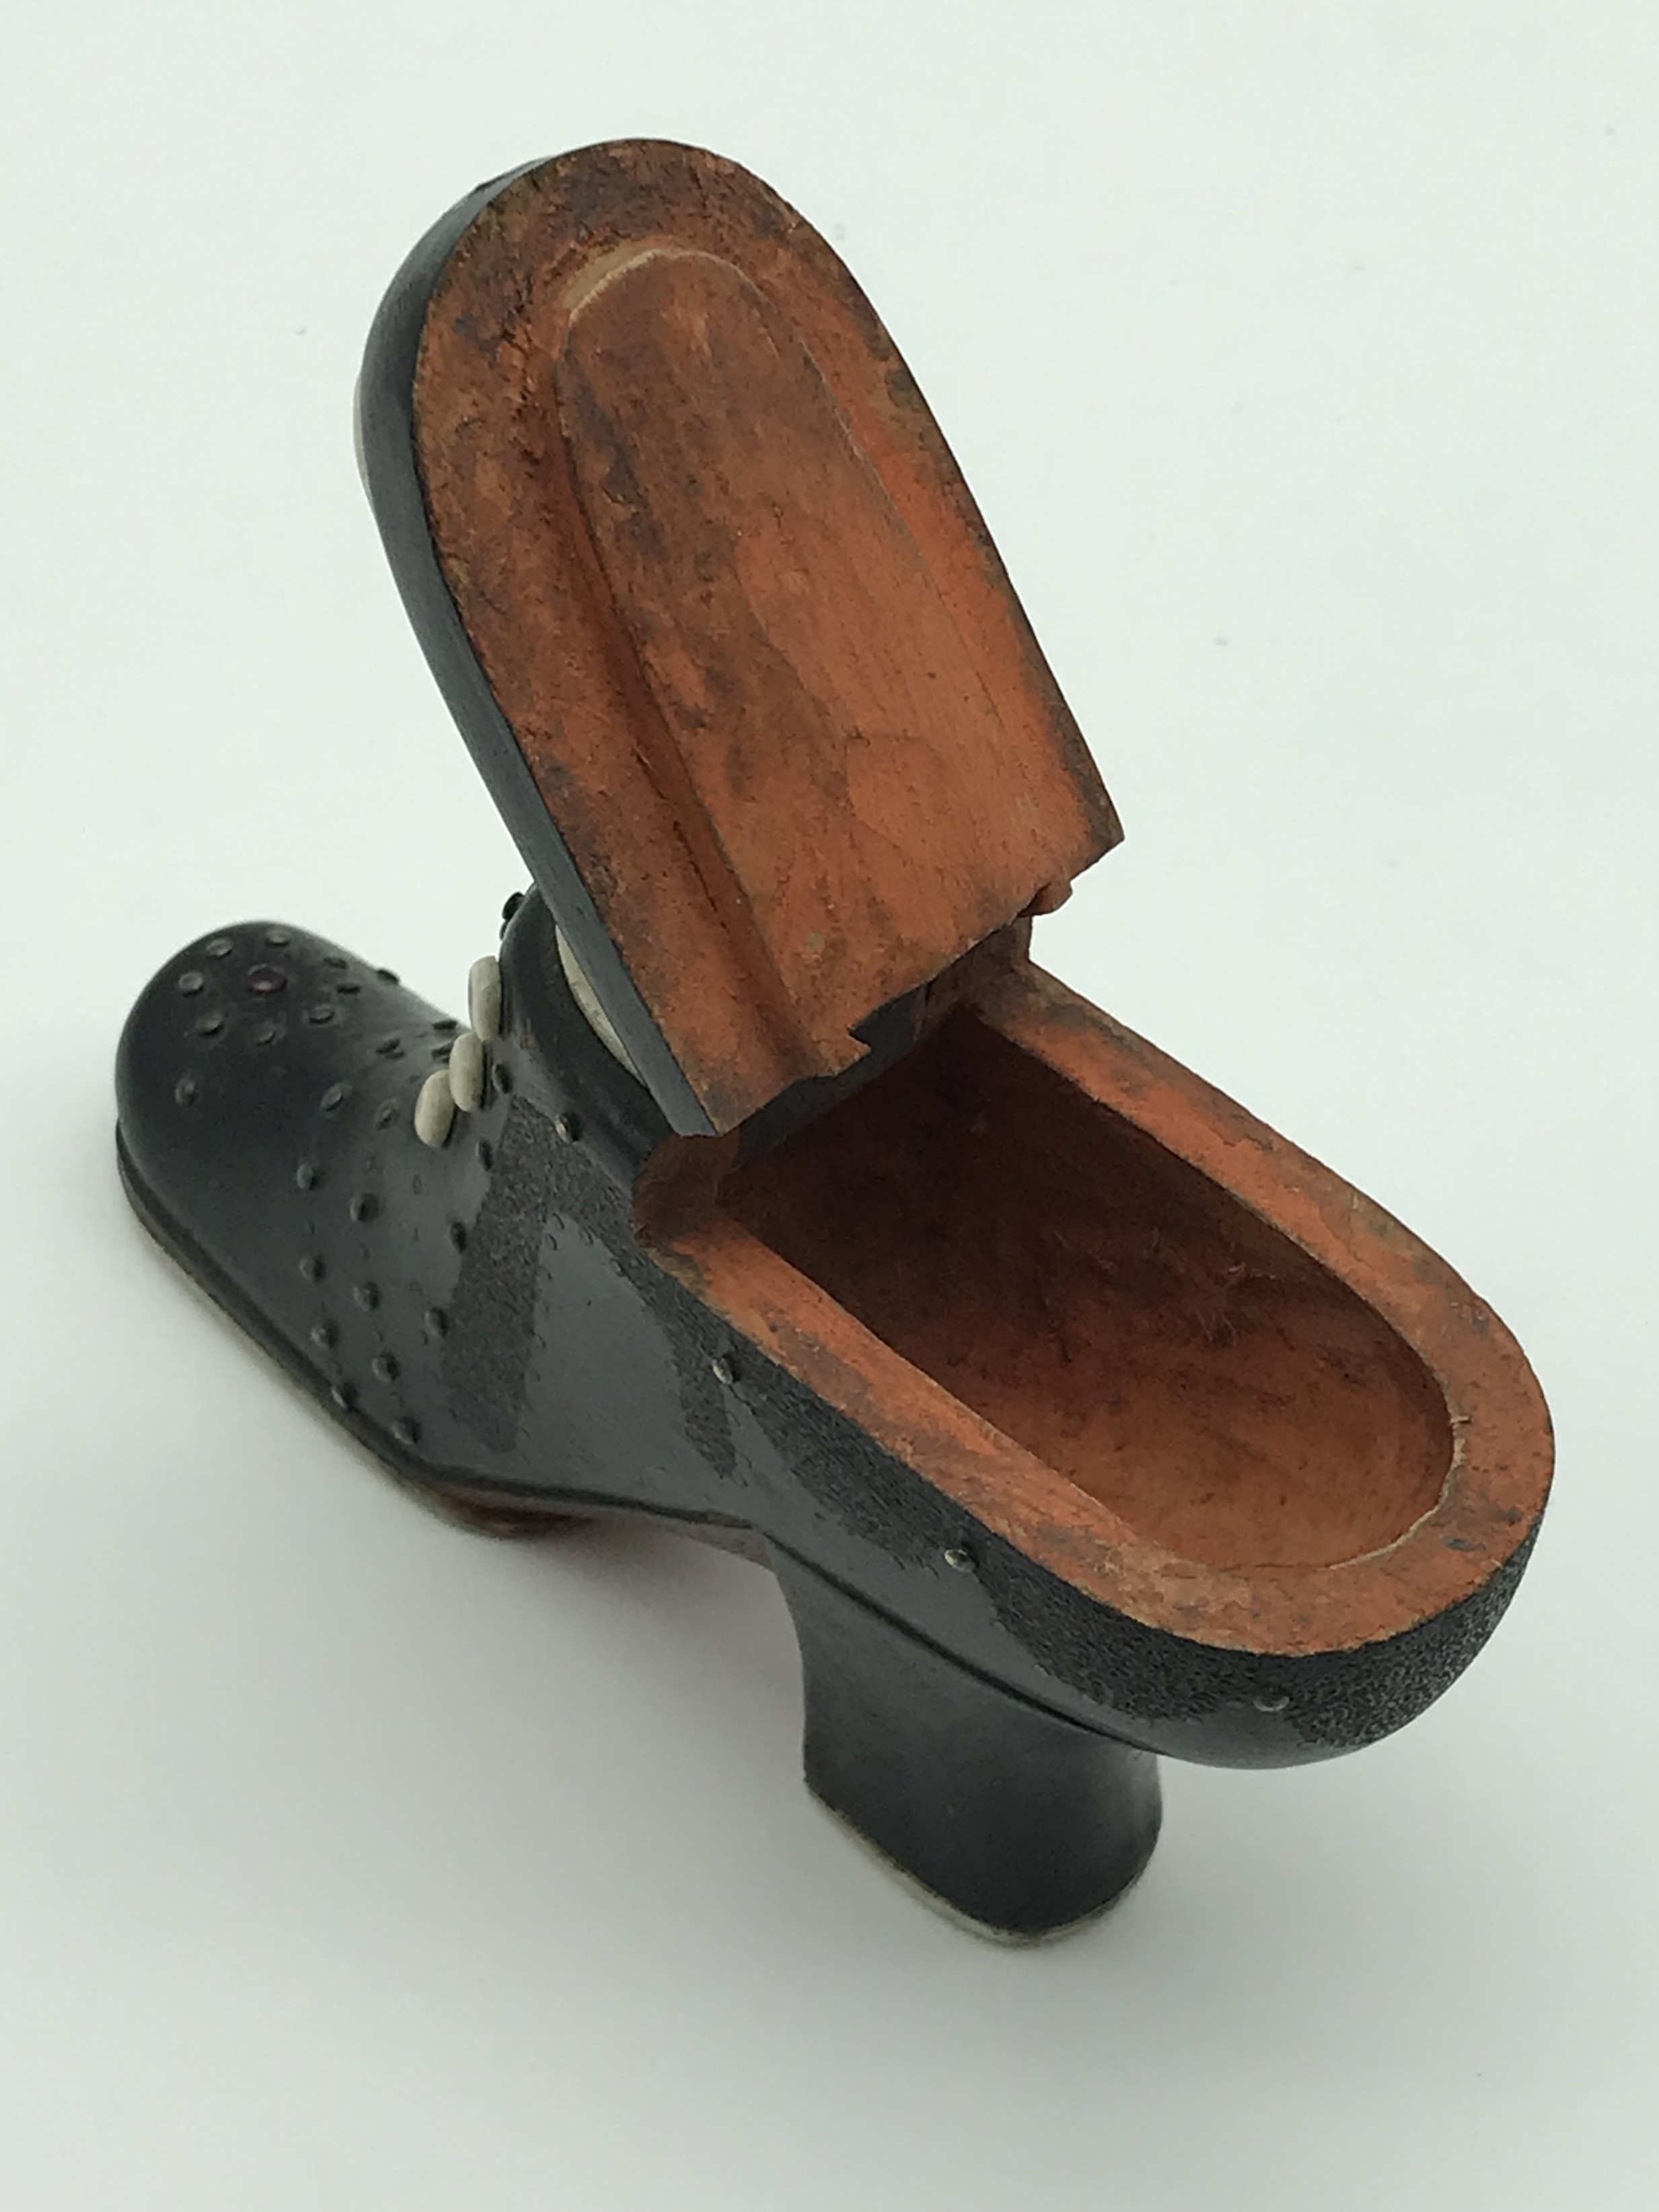 WOODEN SHOE SNUFF BOX - Image 7 of 9